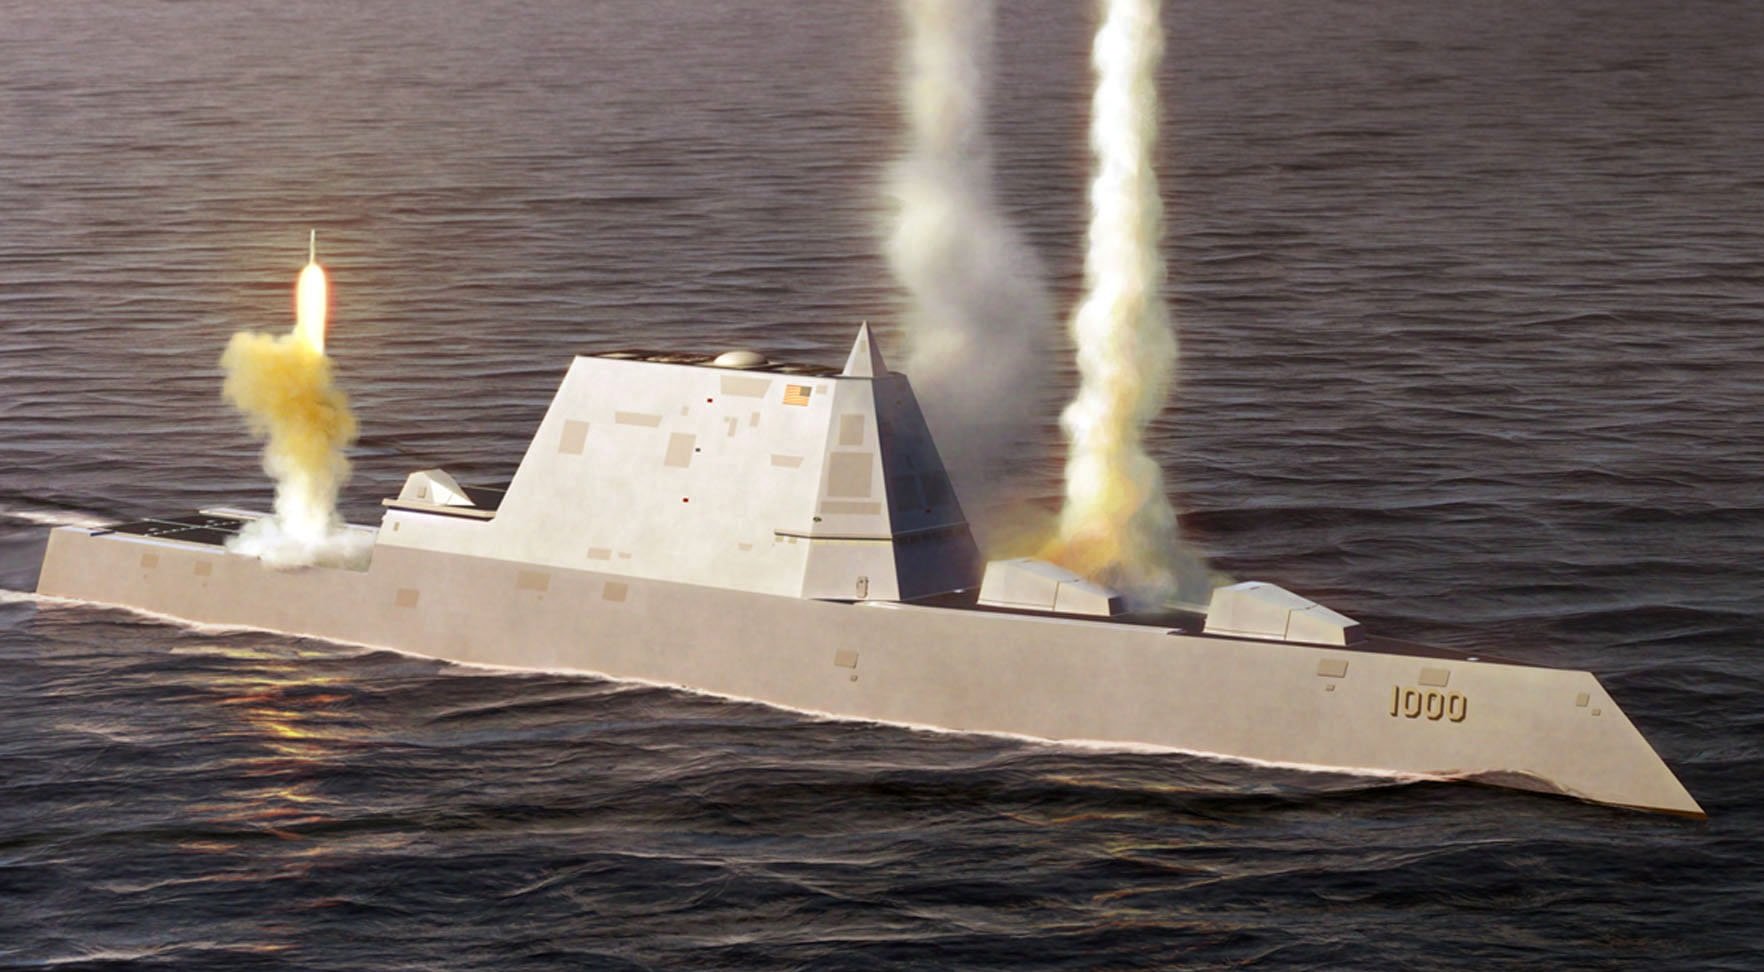 The U.S. Navy's New Stealth Destroyer Is Super Expensive and Has No